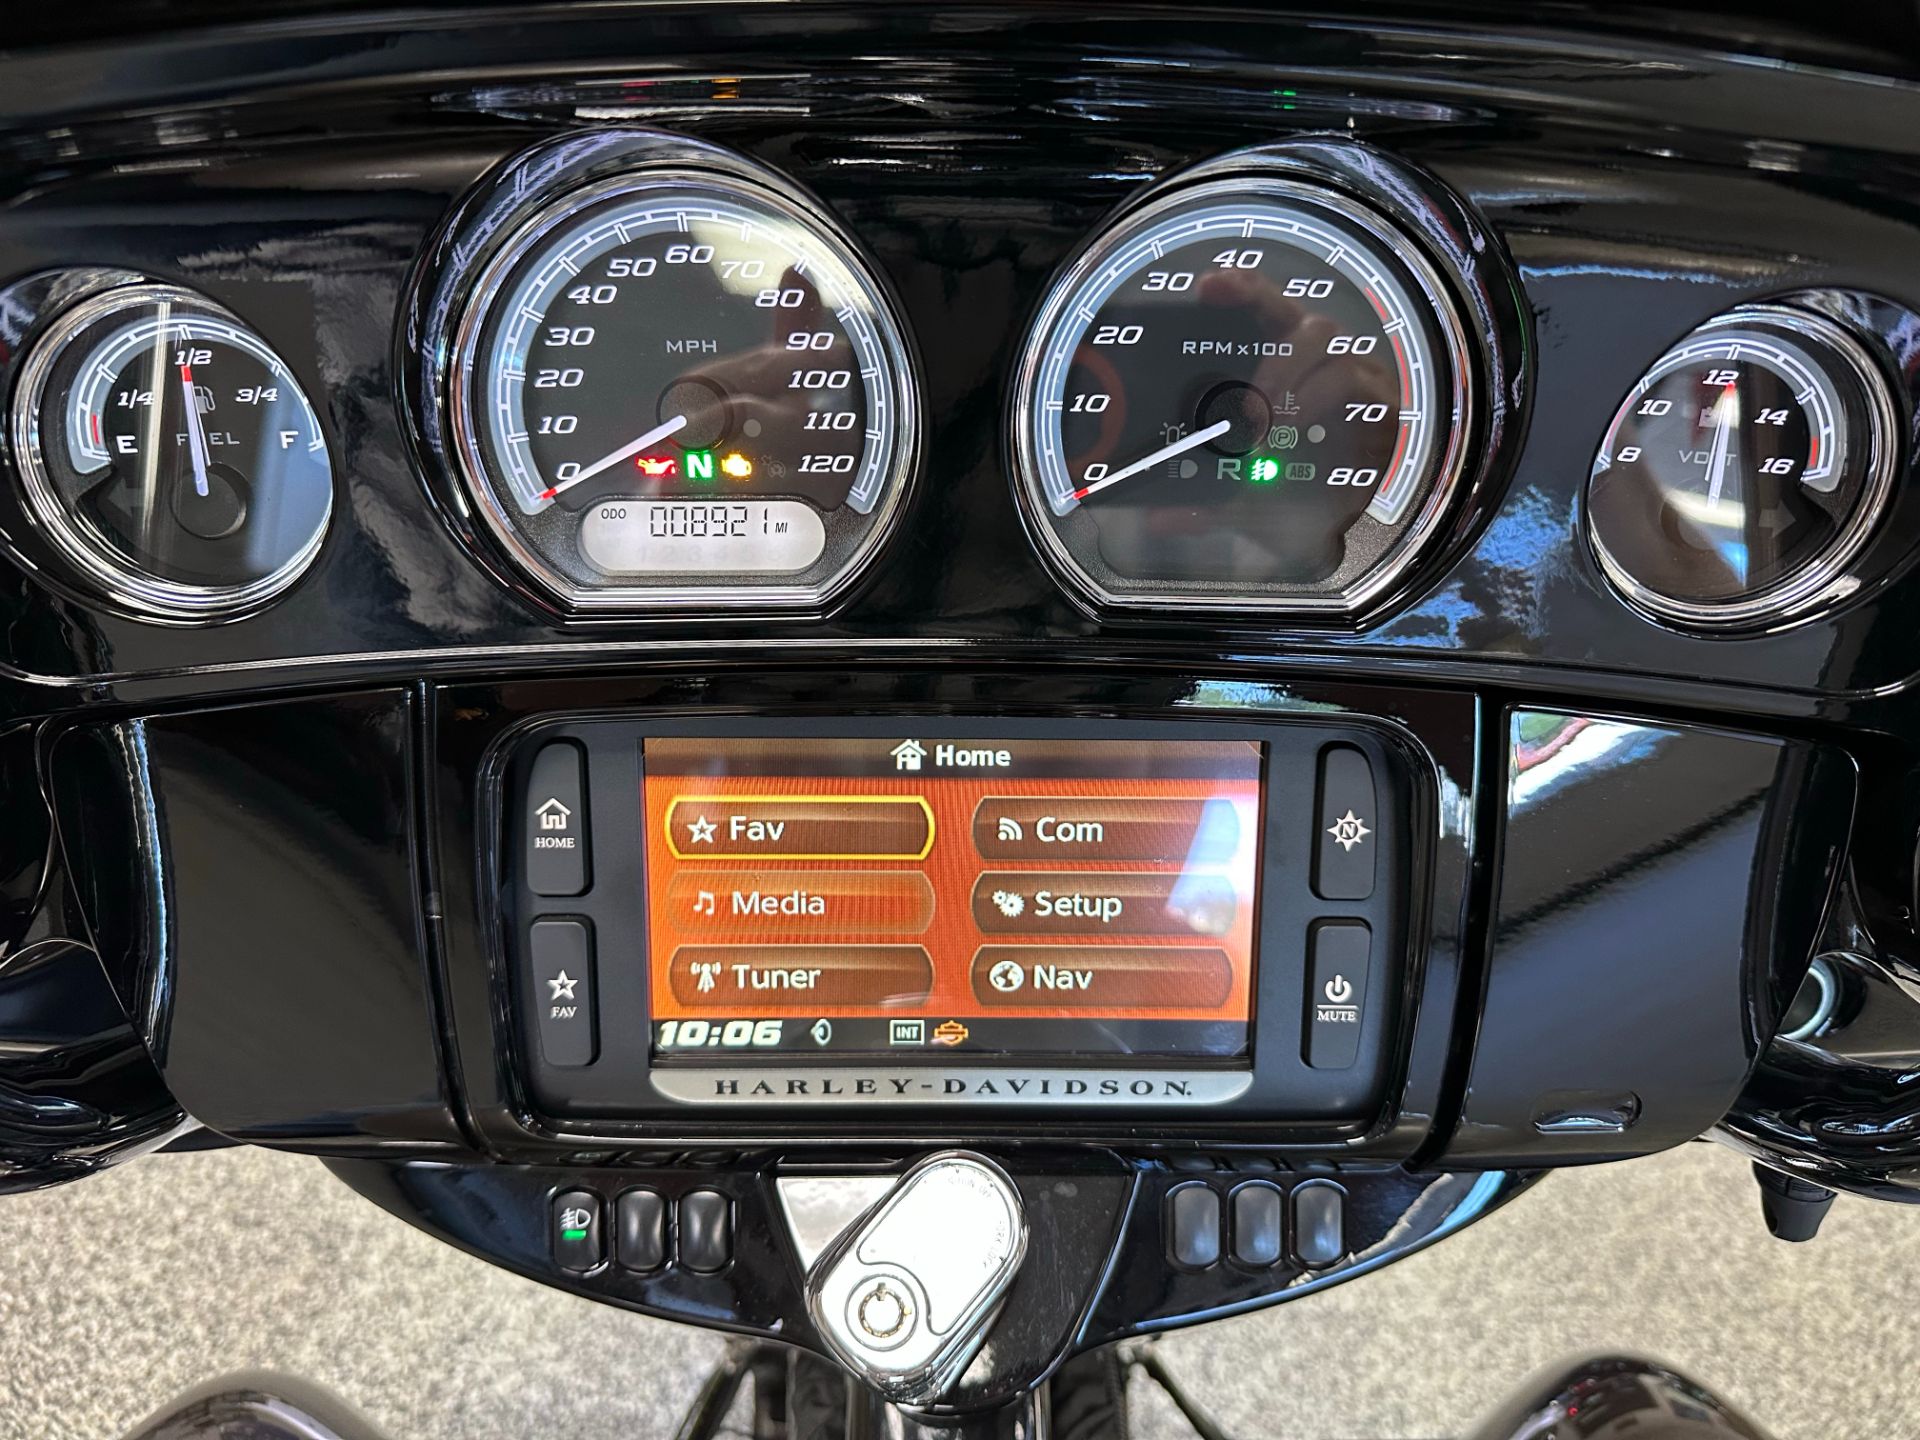 2018 Harley-Davidson Ultra Limited in Knoxville, Tennessee - Photo 18